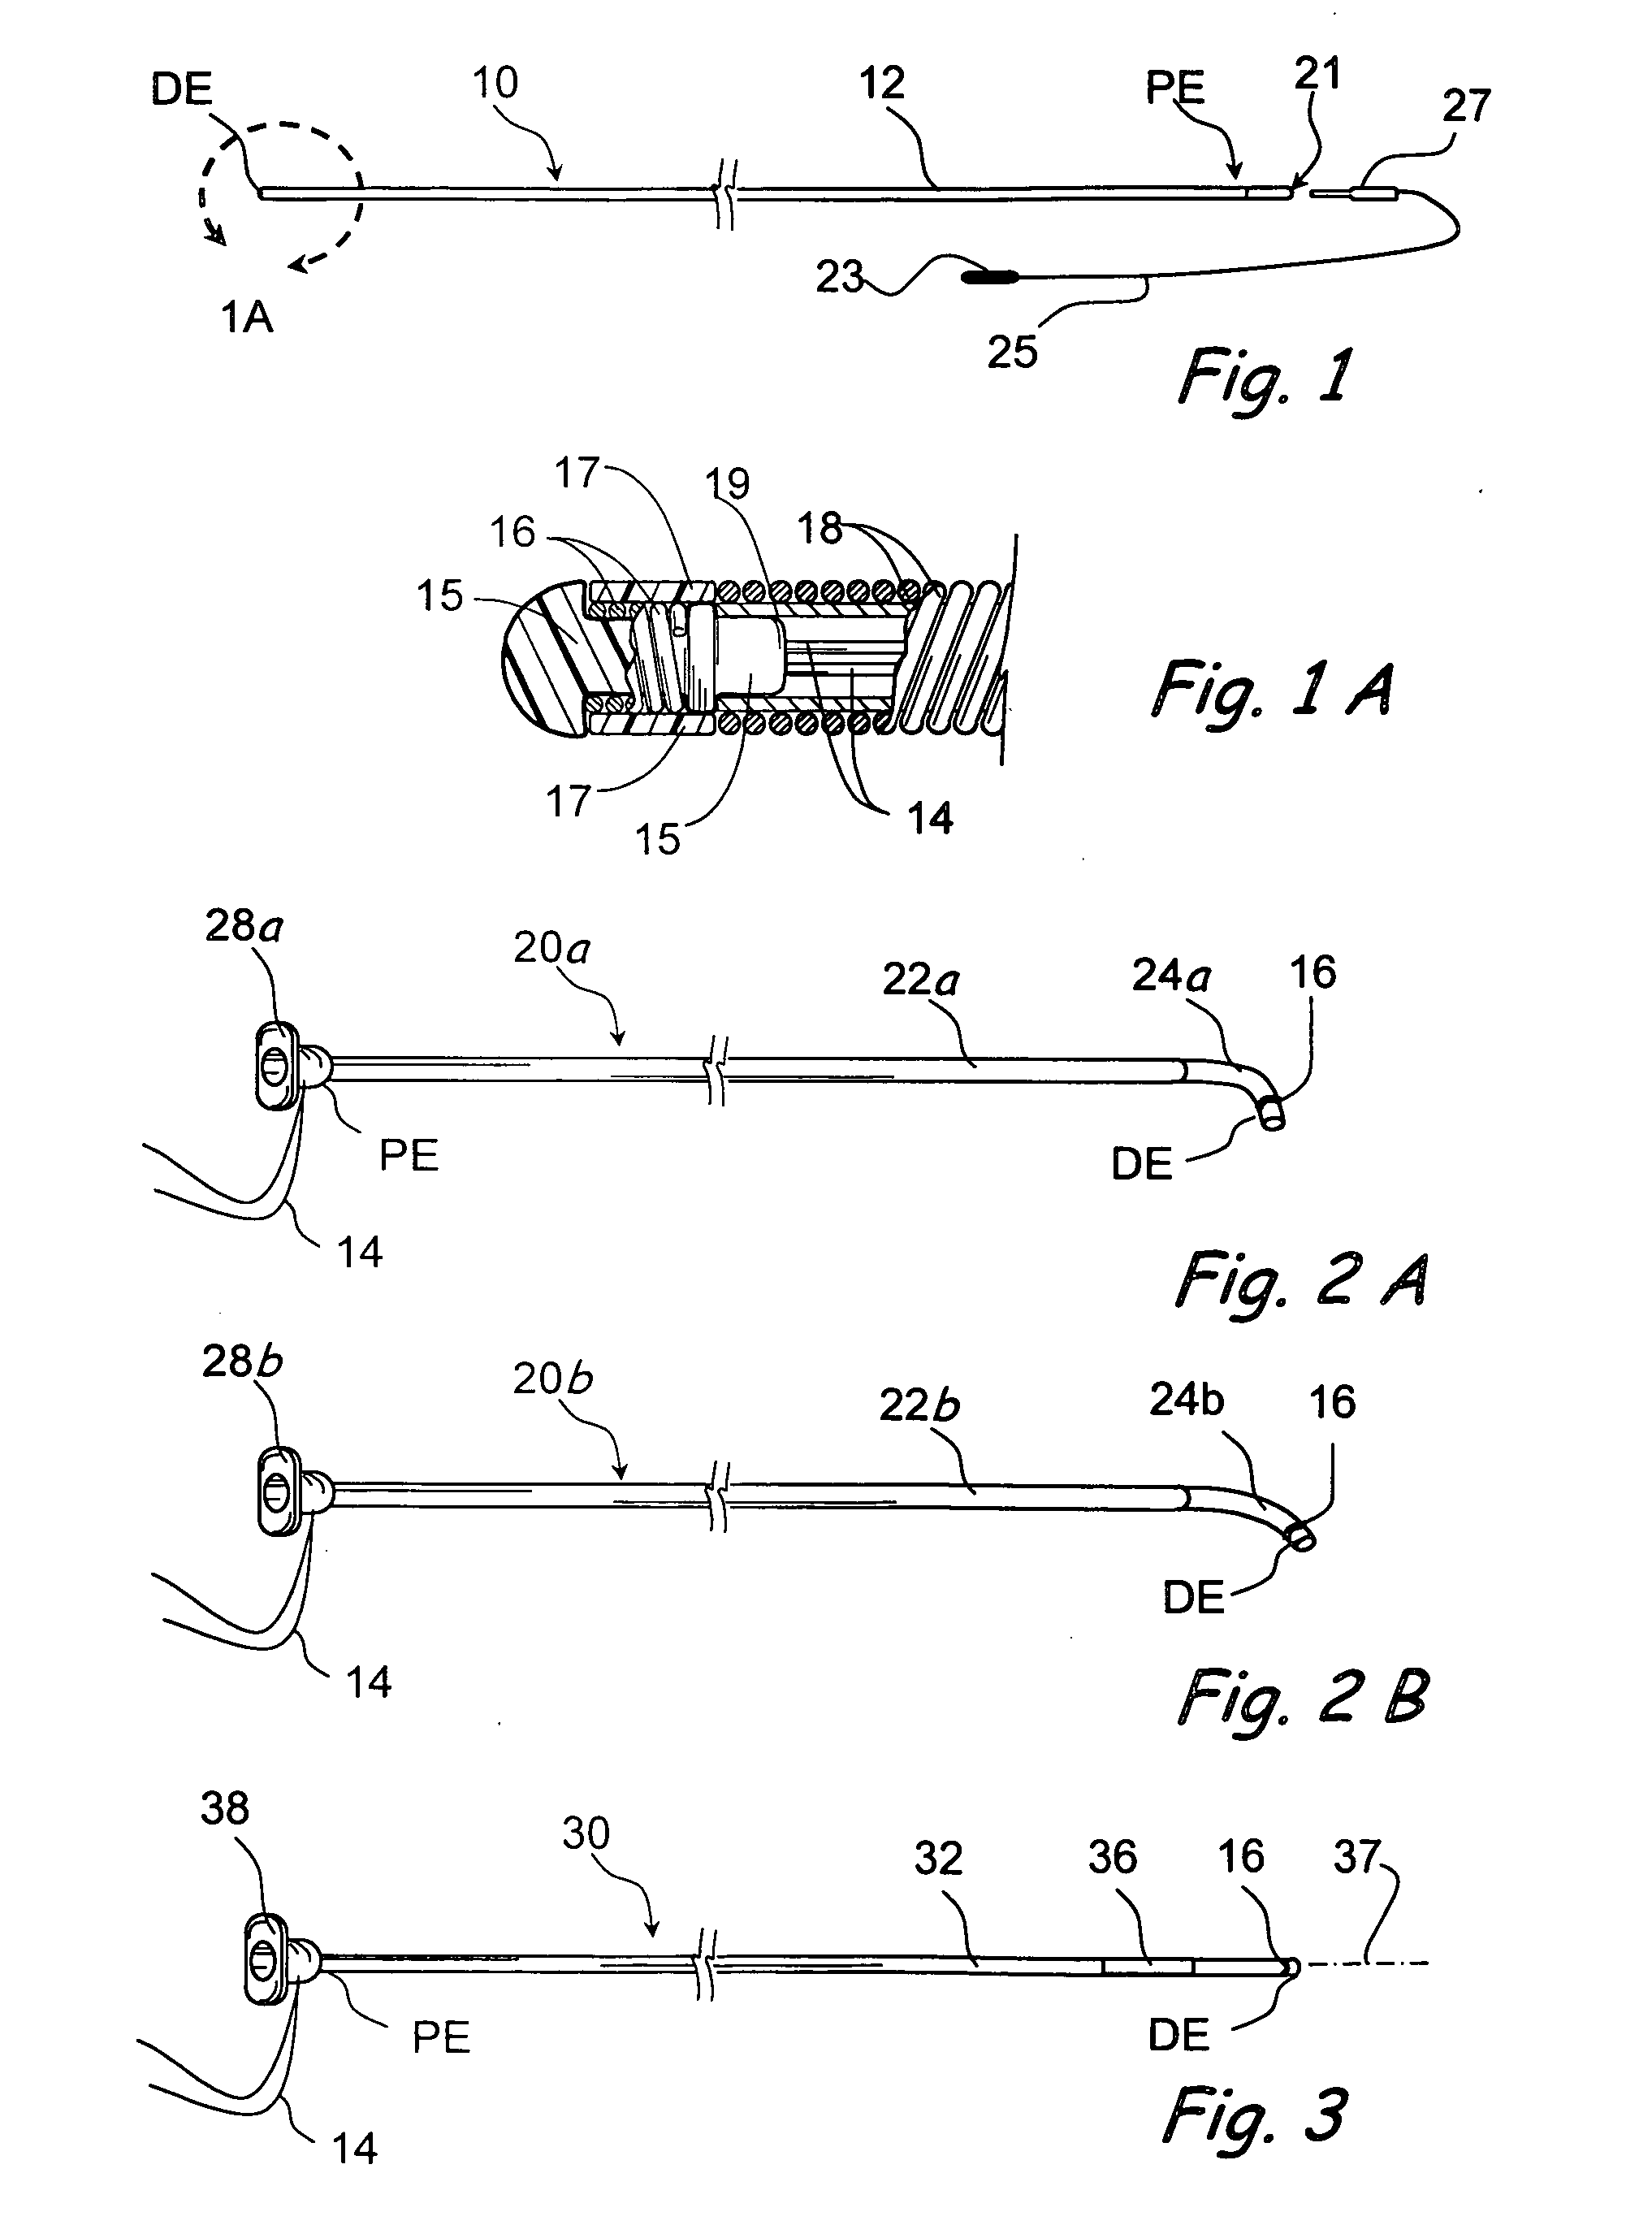 Systems and methods for performing image guided procedures within the ear, nose, throat and paranasal sinuses